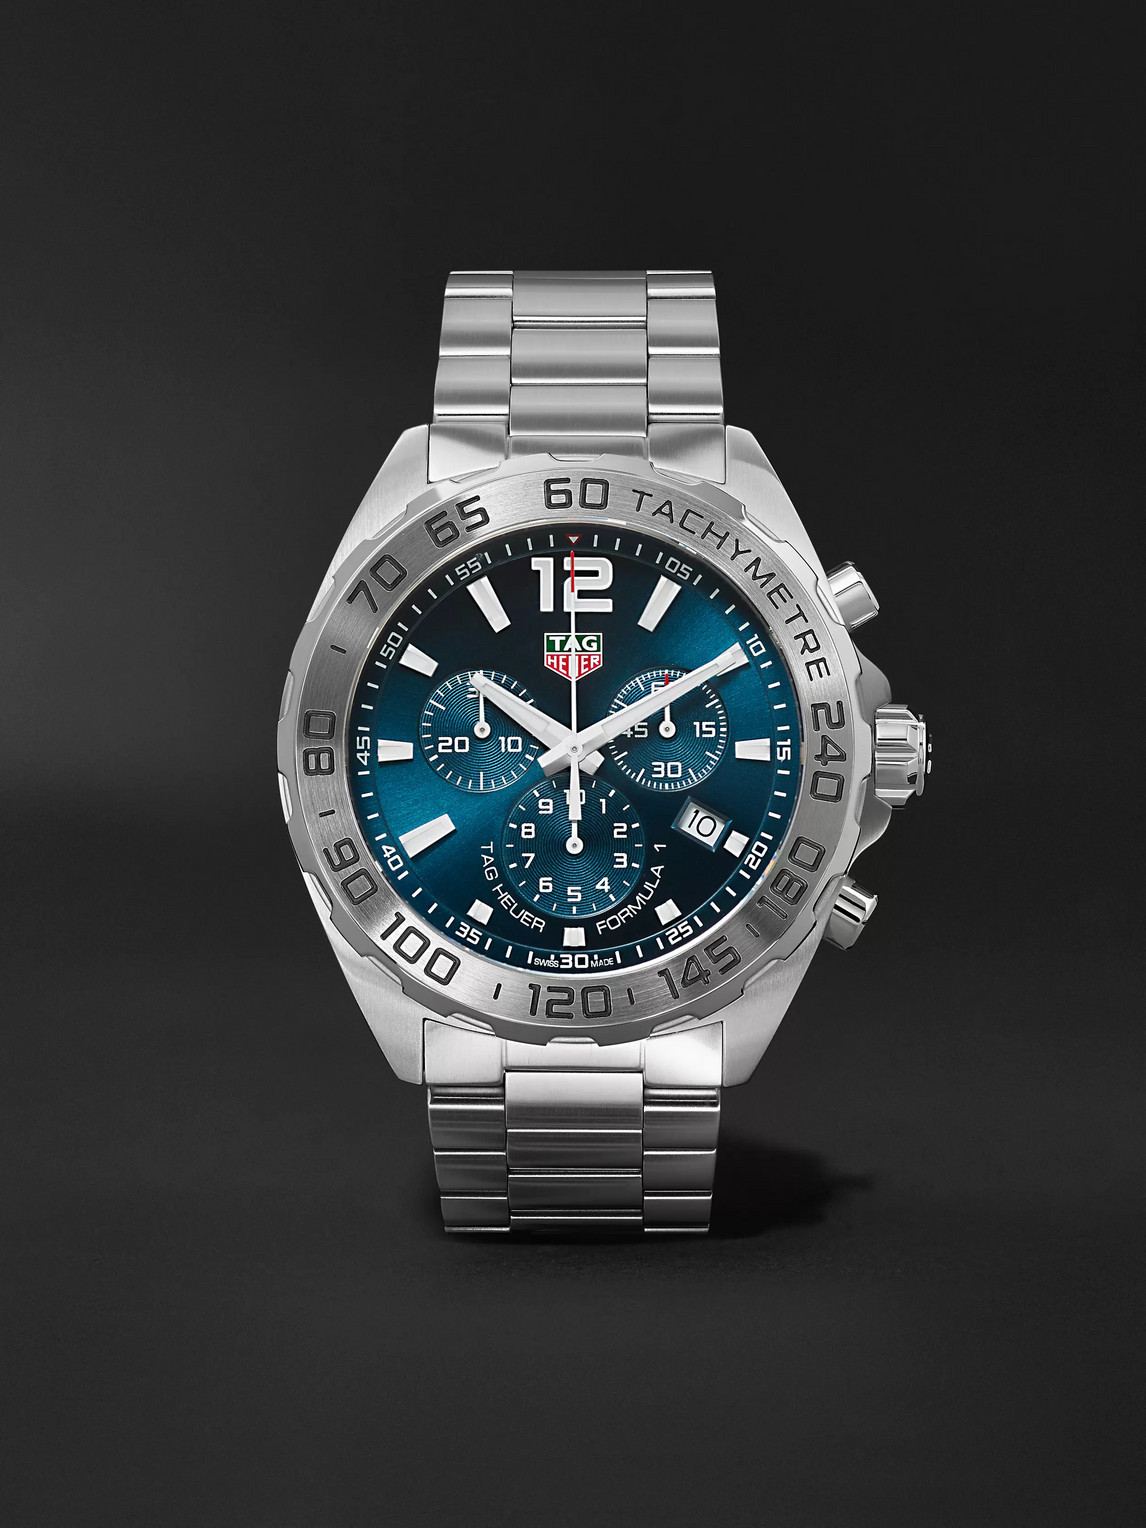 Tag Heuer Formula 1 Chronograph 43mm Stainless Steel Watch, Ref. No. Caz101k.ba0842 In Blue